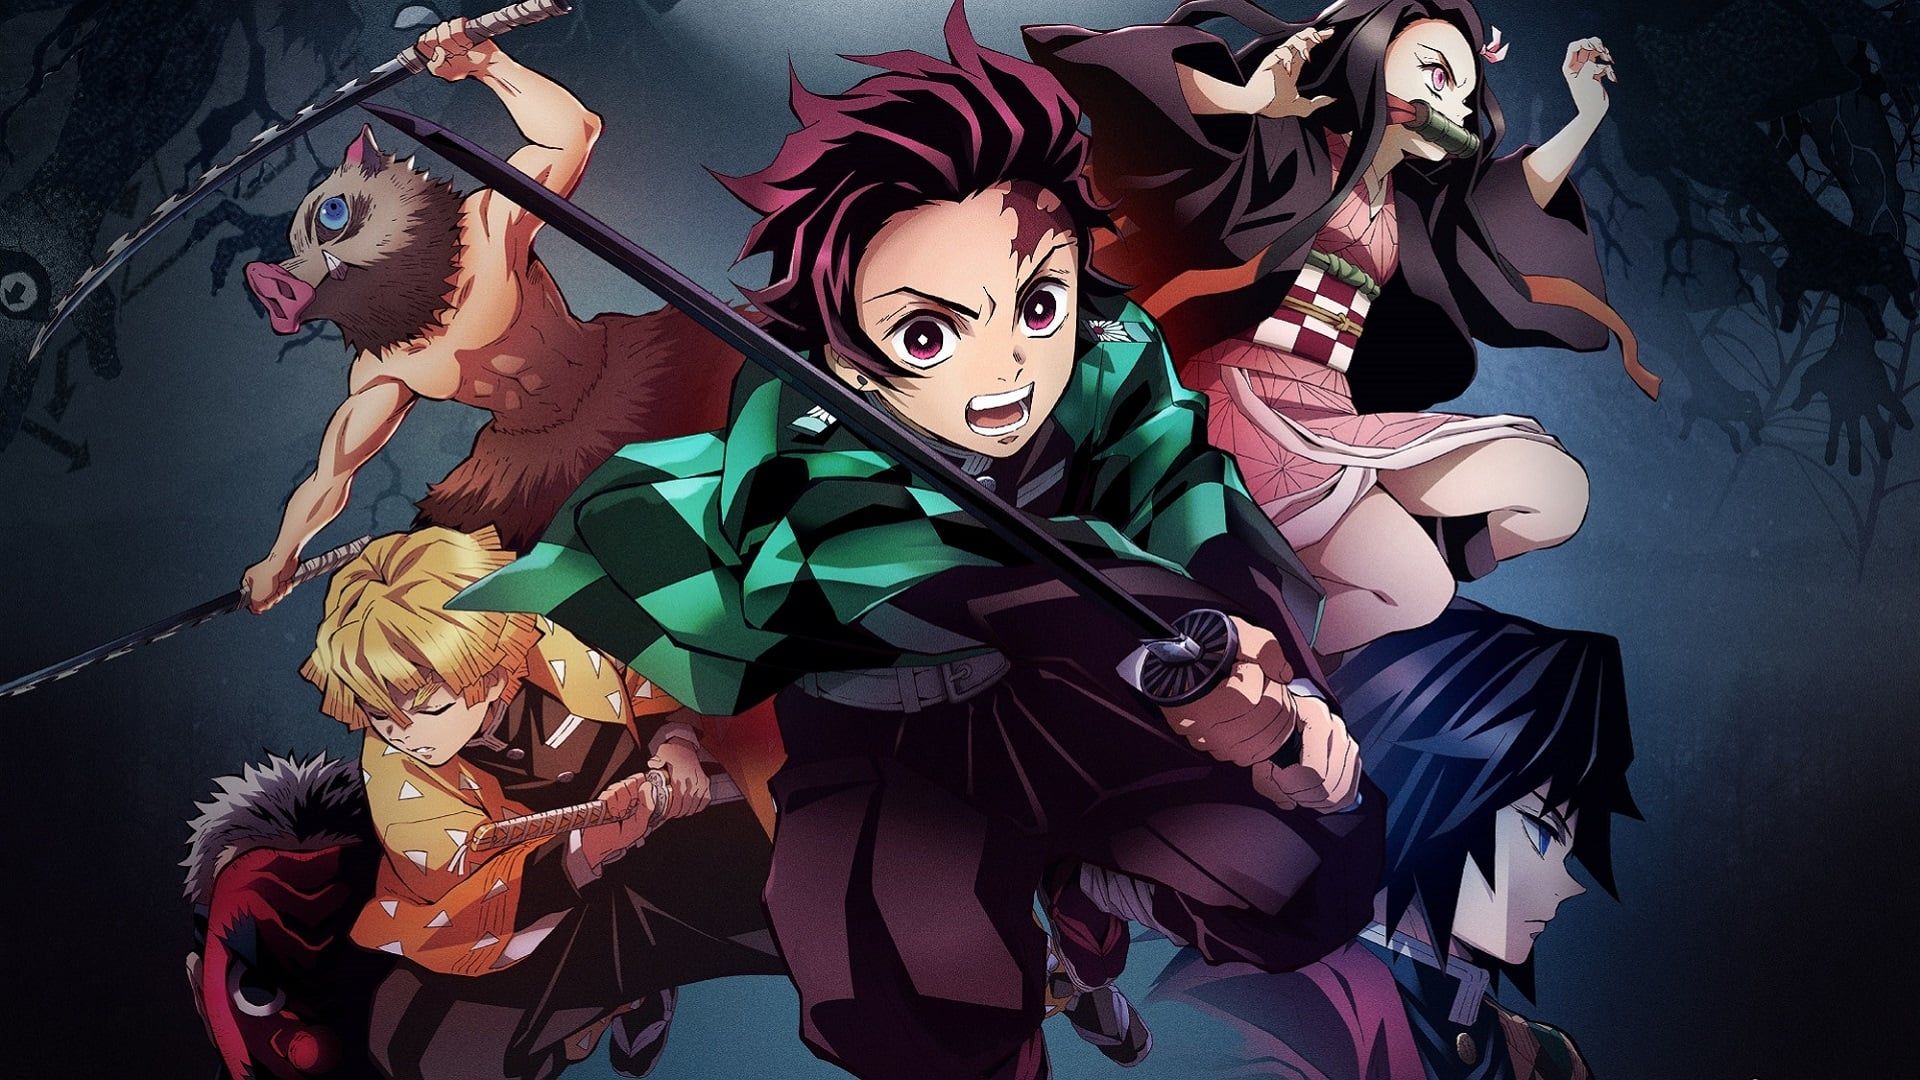 Demon Slayer Kimetsu no Yaiba Chapter 200 Release Date, Raw Scans and Read Online